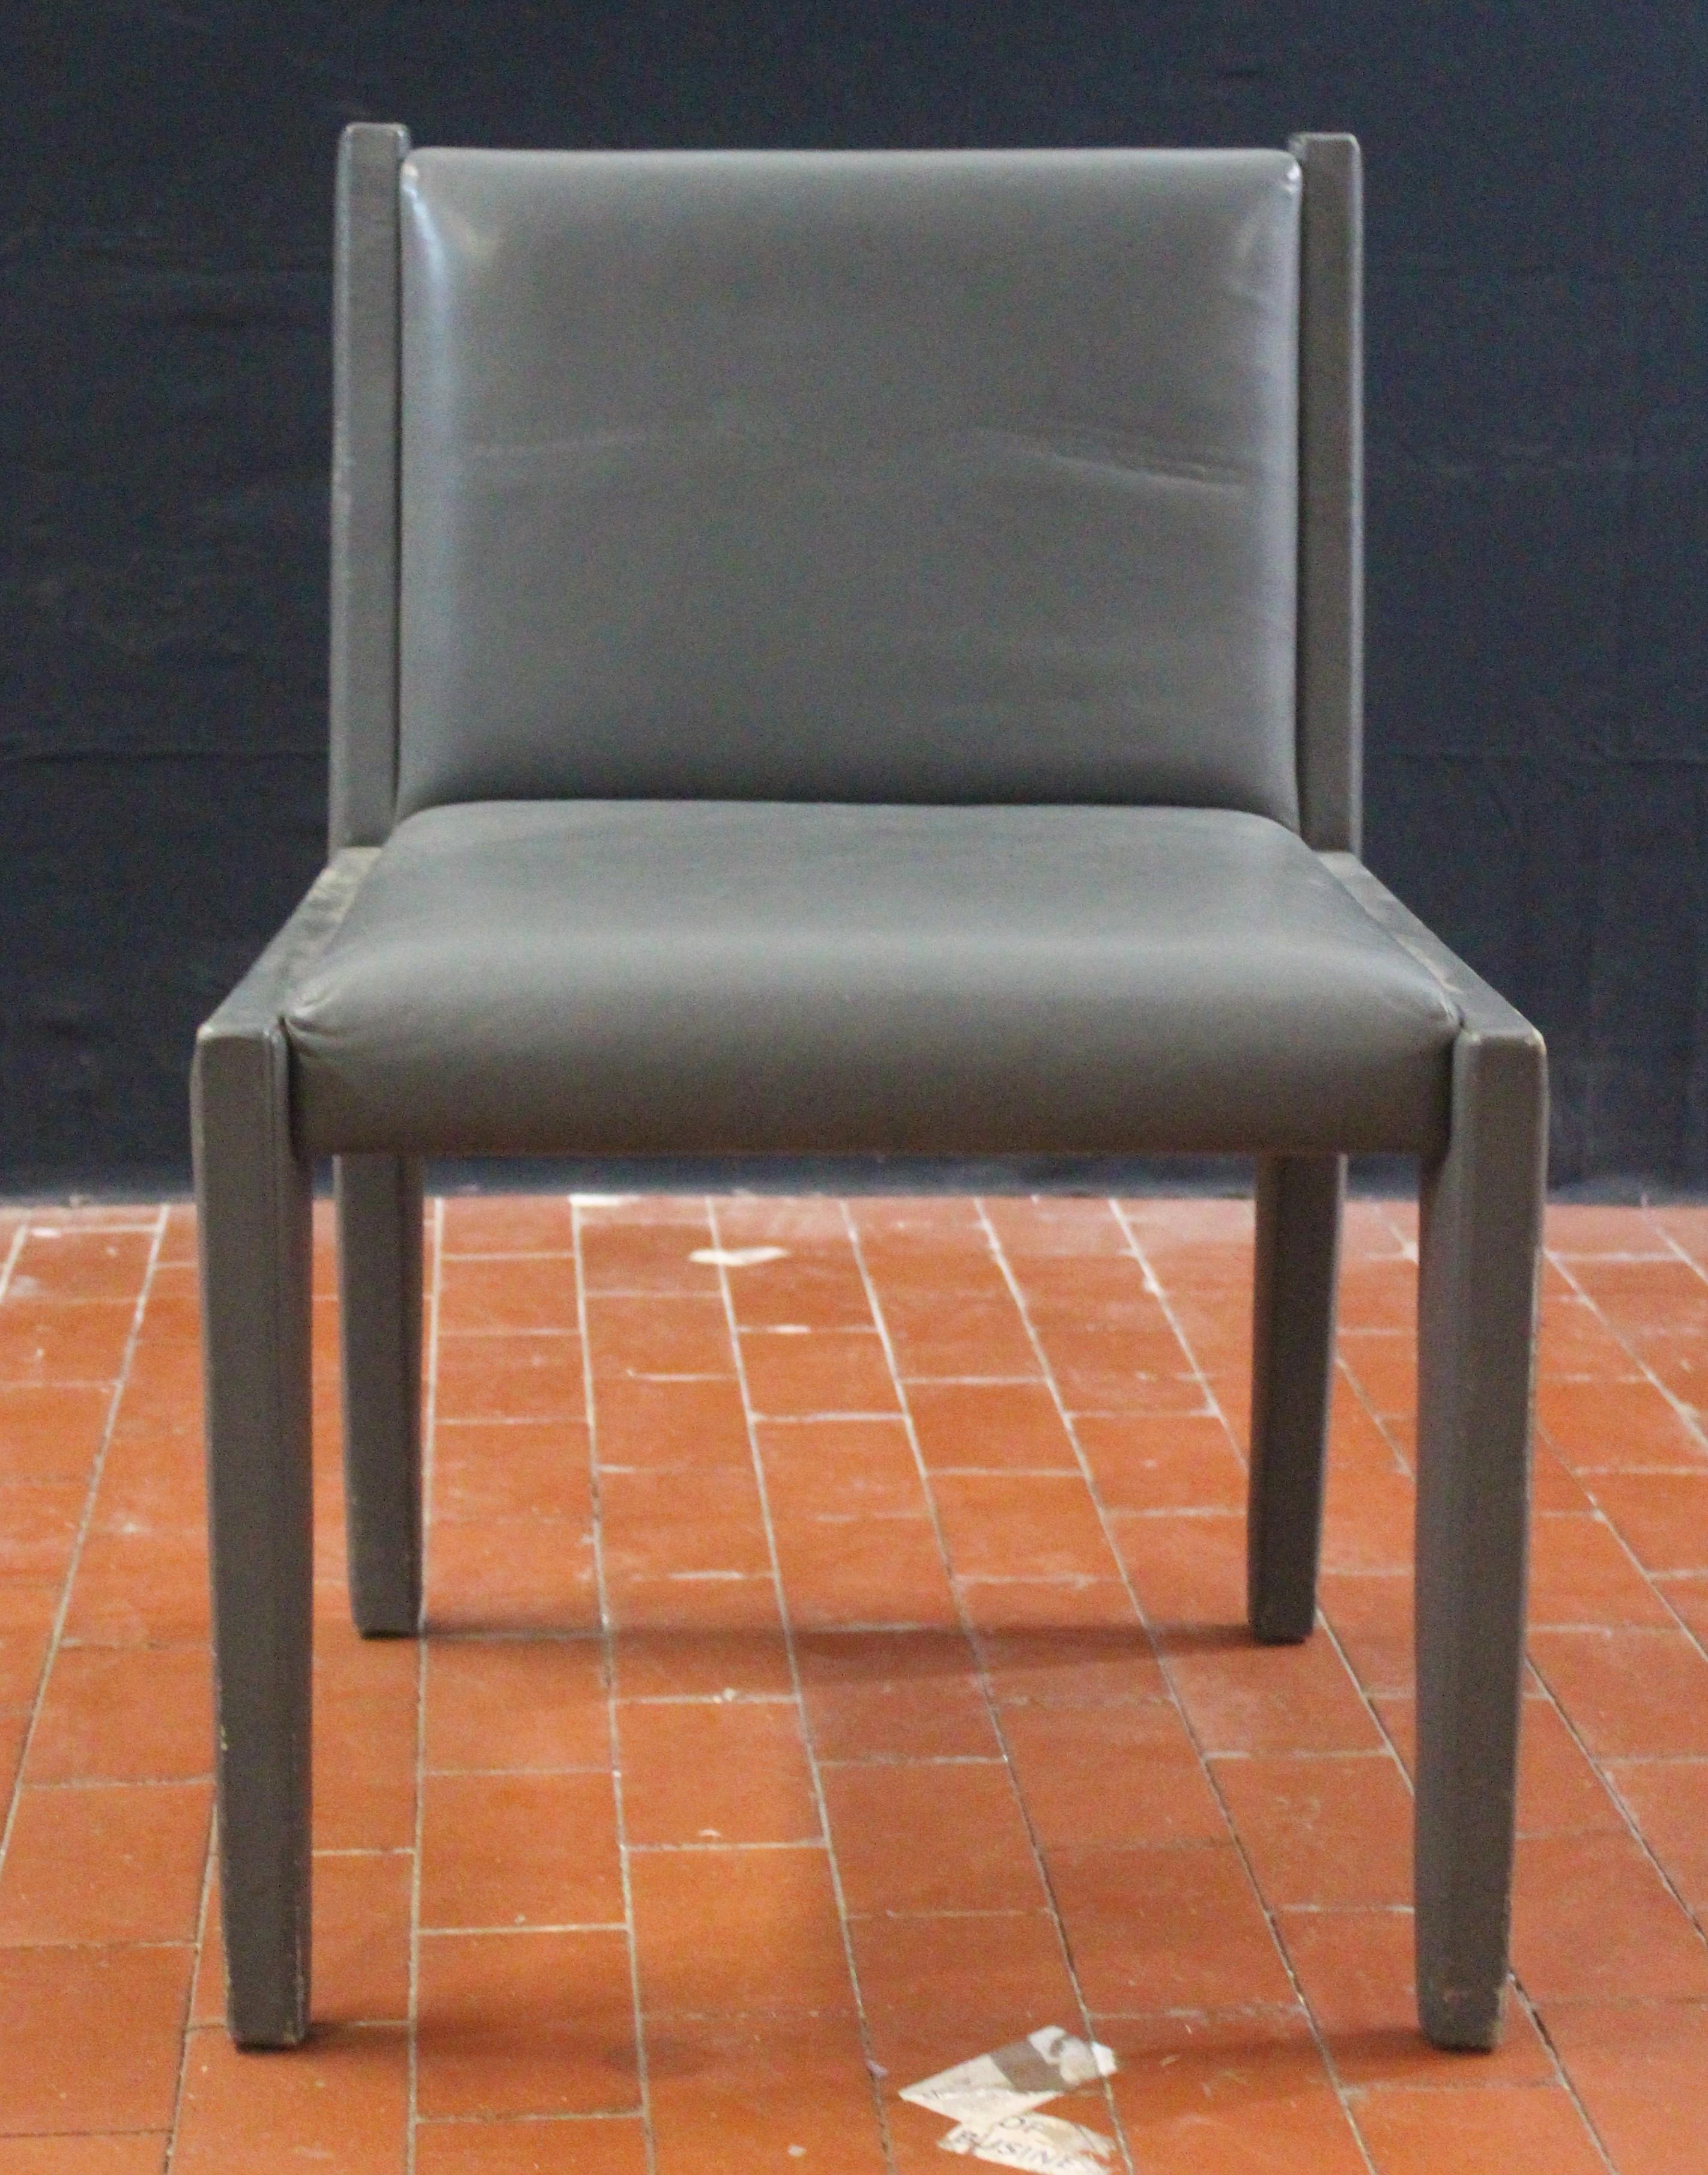 Chic and stylish leather clad side chair in light gray.